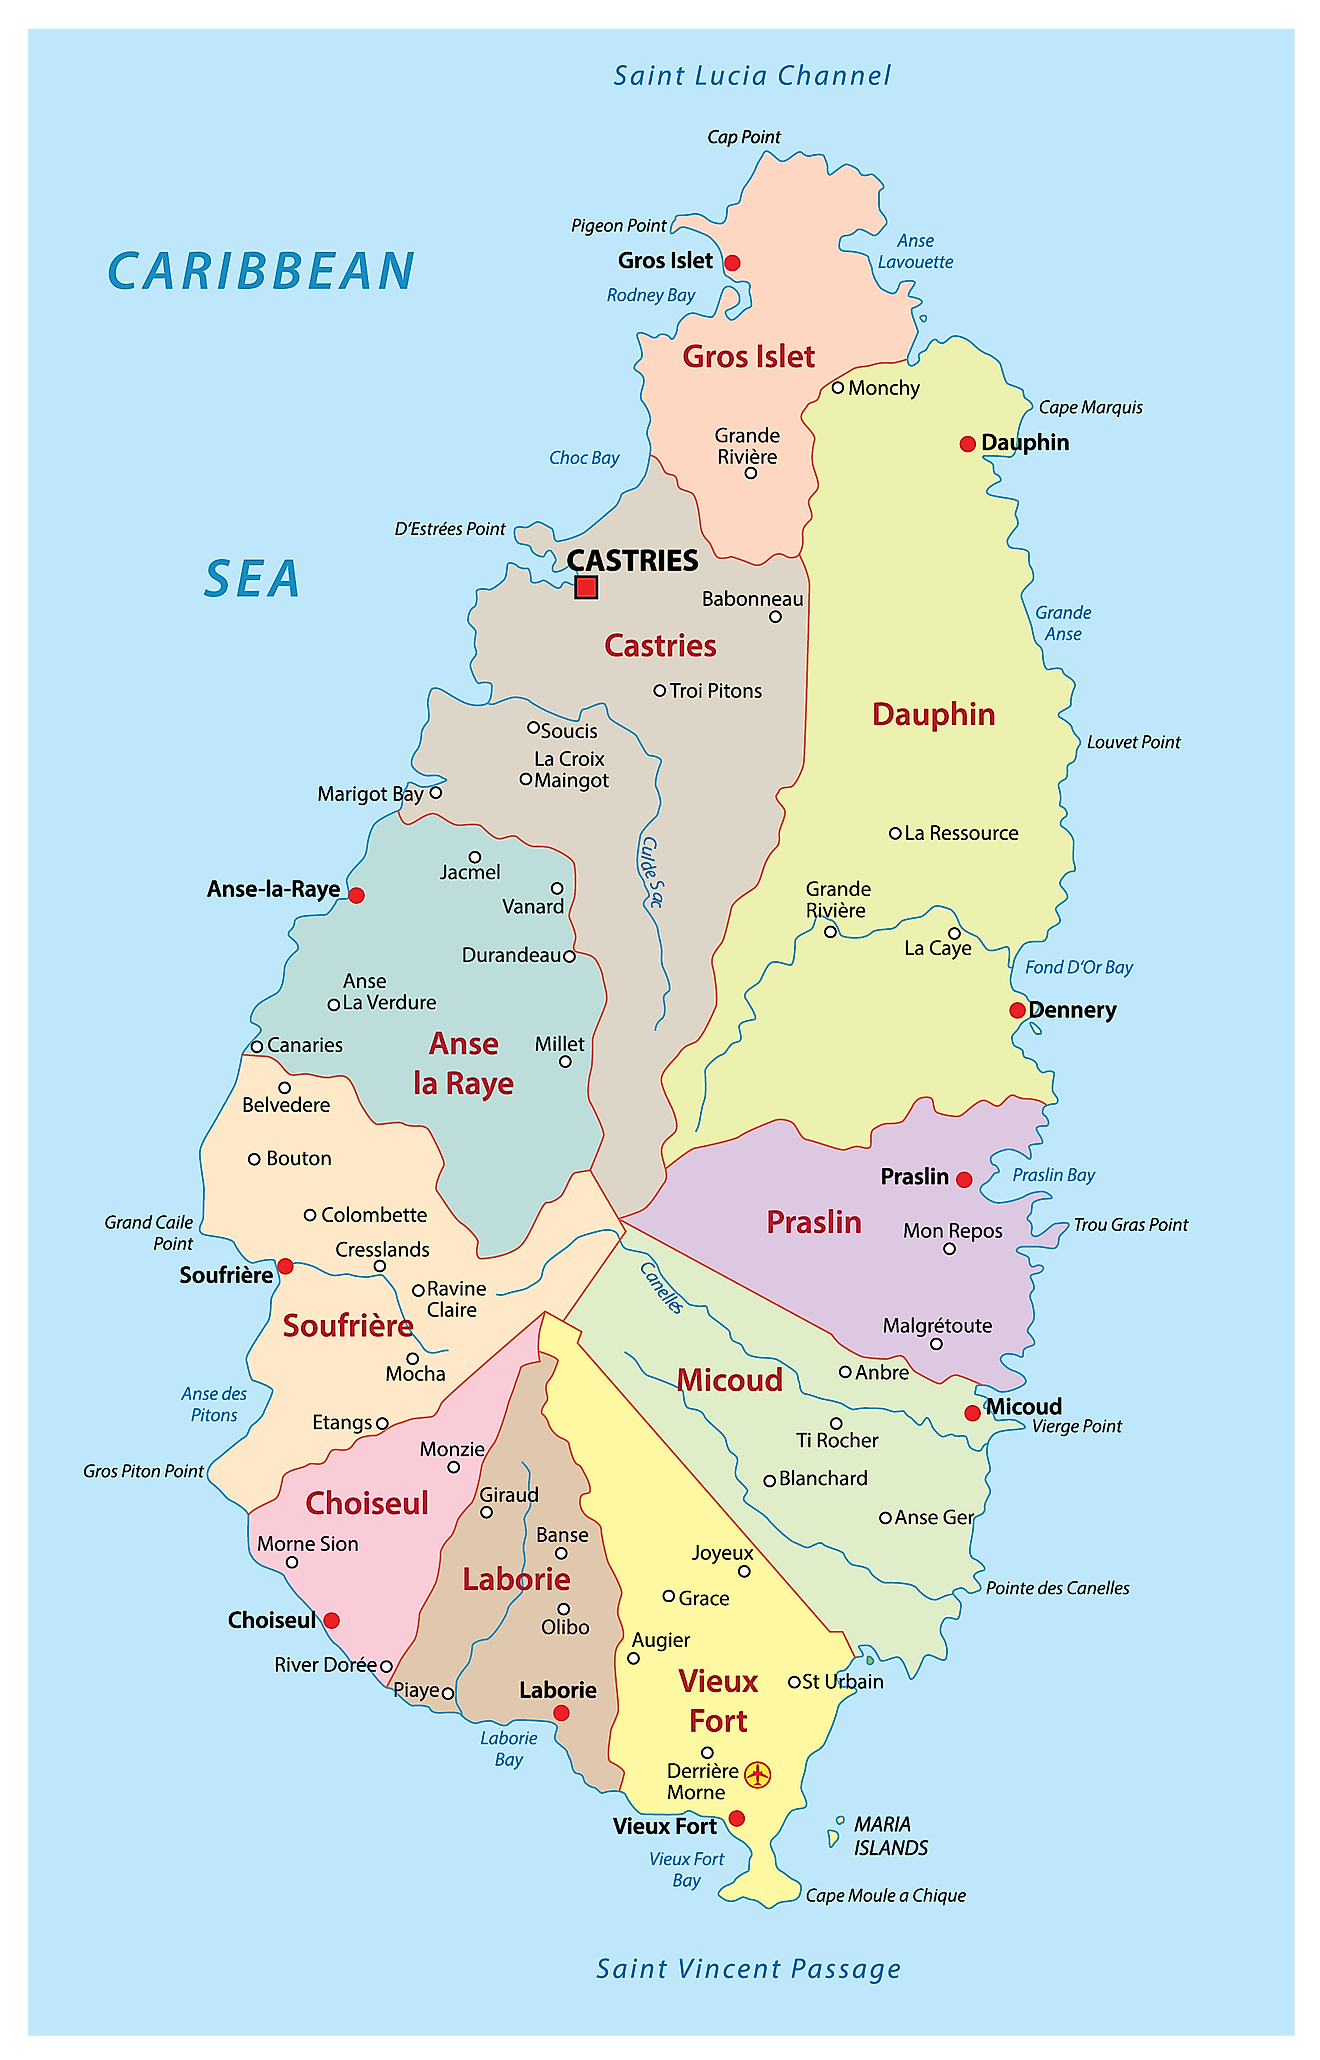 Political map of Saint Lucia showing its 11 neighborhoods and the capital Castries.  